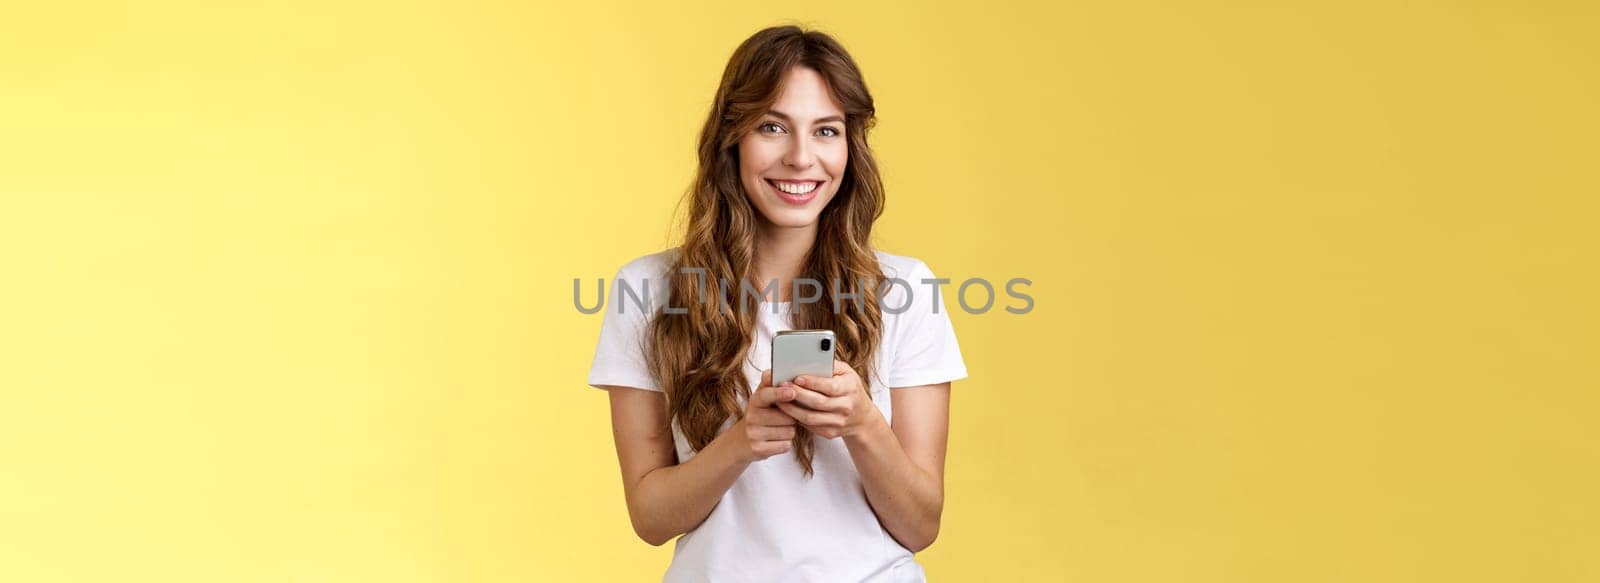 Enthusiastic charming sociable young girl messaging friend sending photos social media hold smartphone look camera happily friendly smiling stand yellow background casual outfit. Technology concept